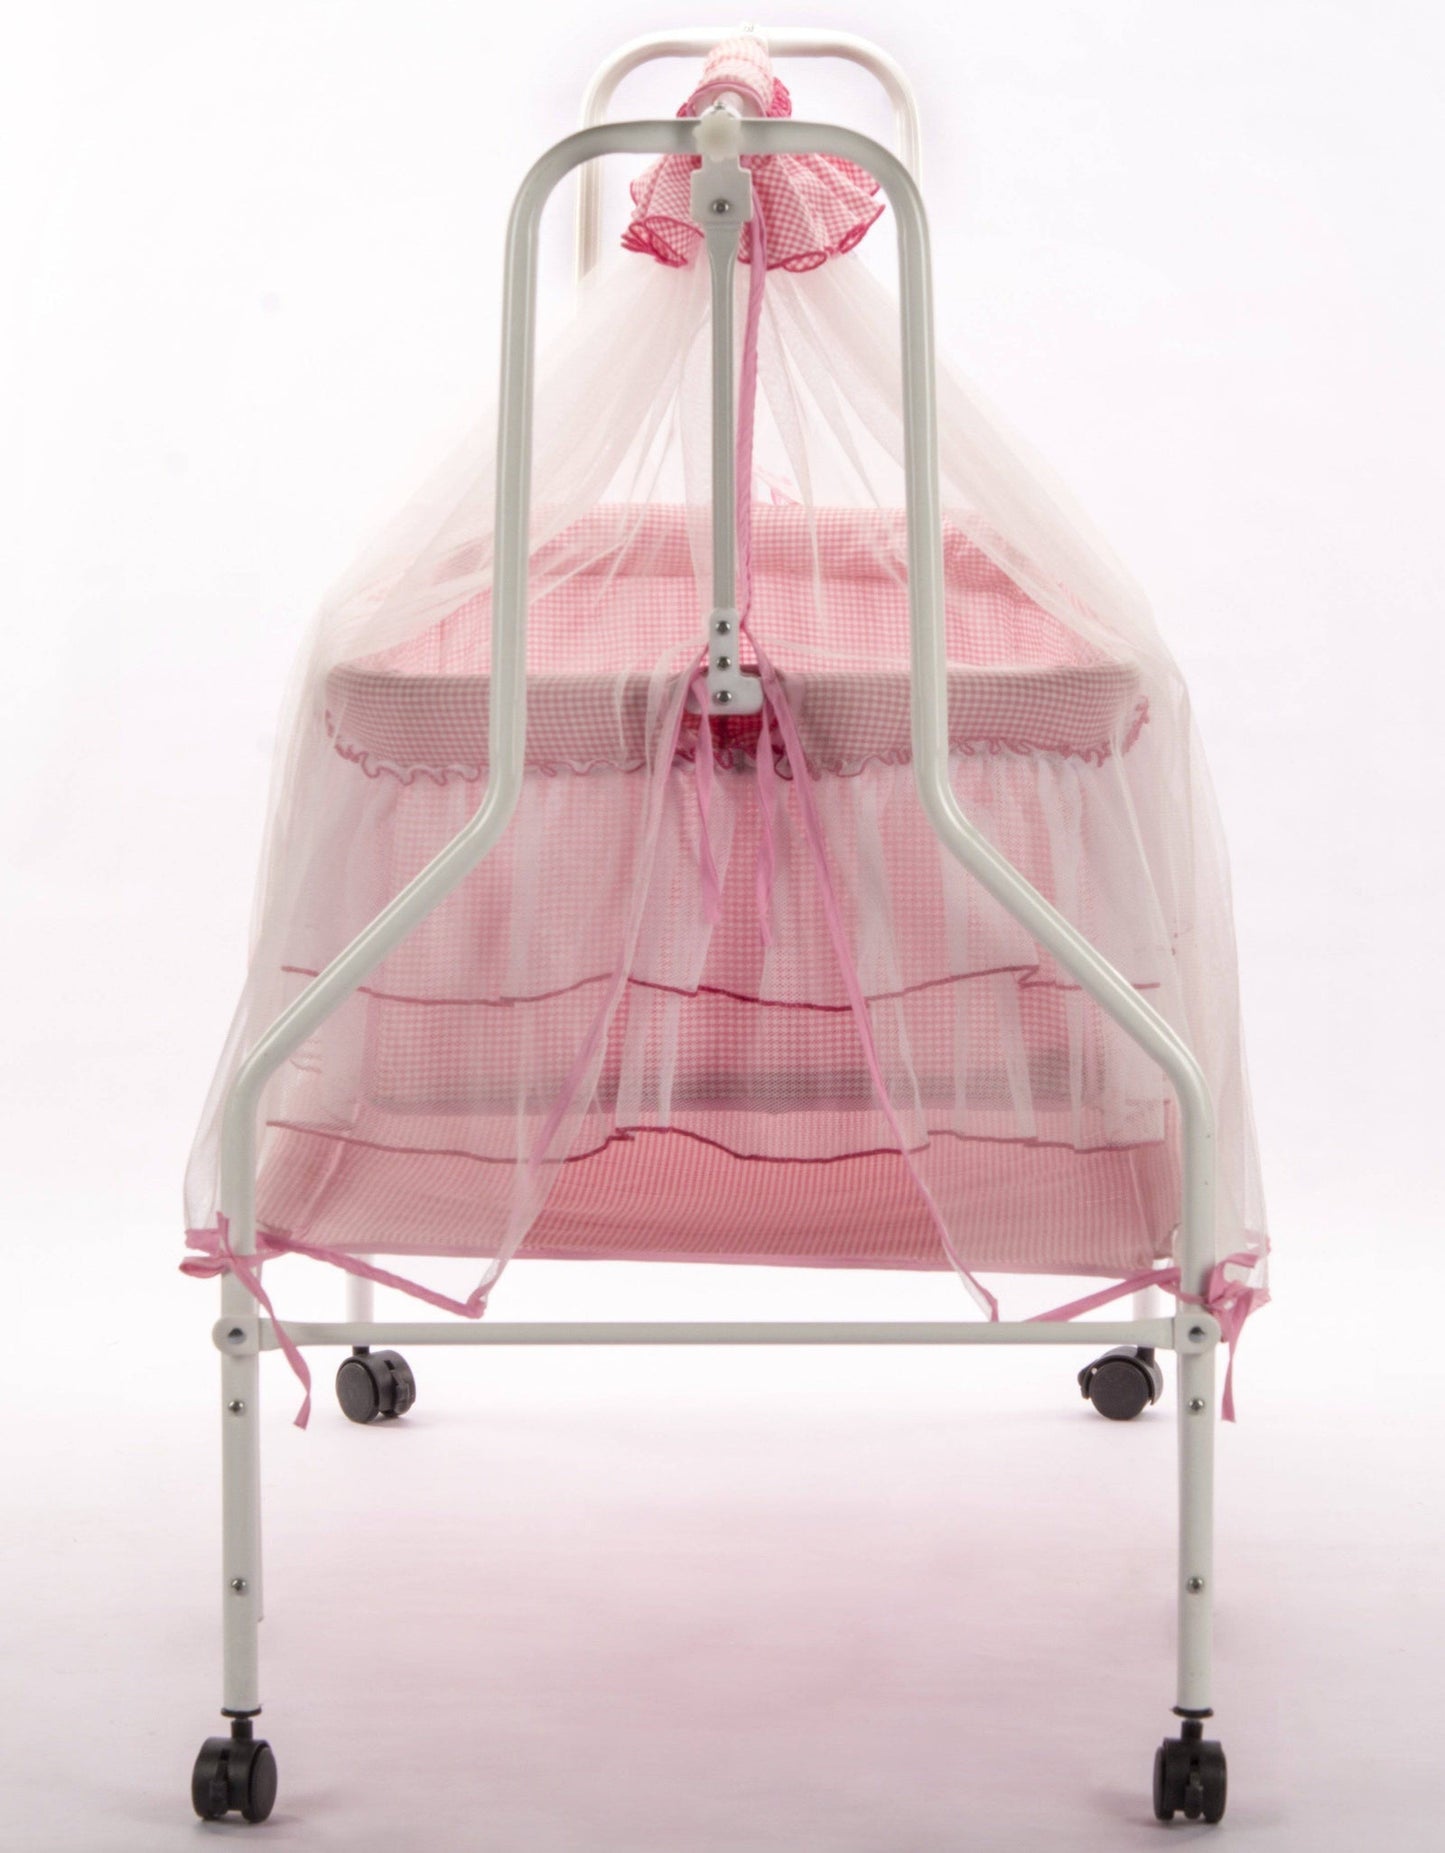 Baby Cradle with New Improved Mattress Design